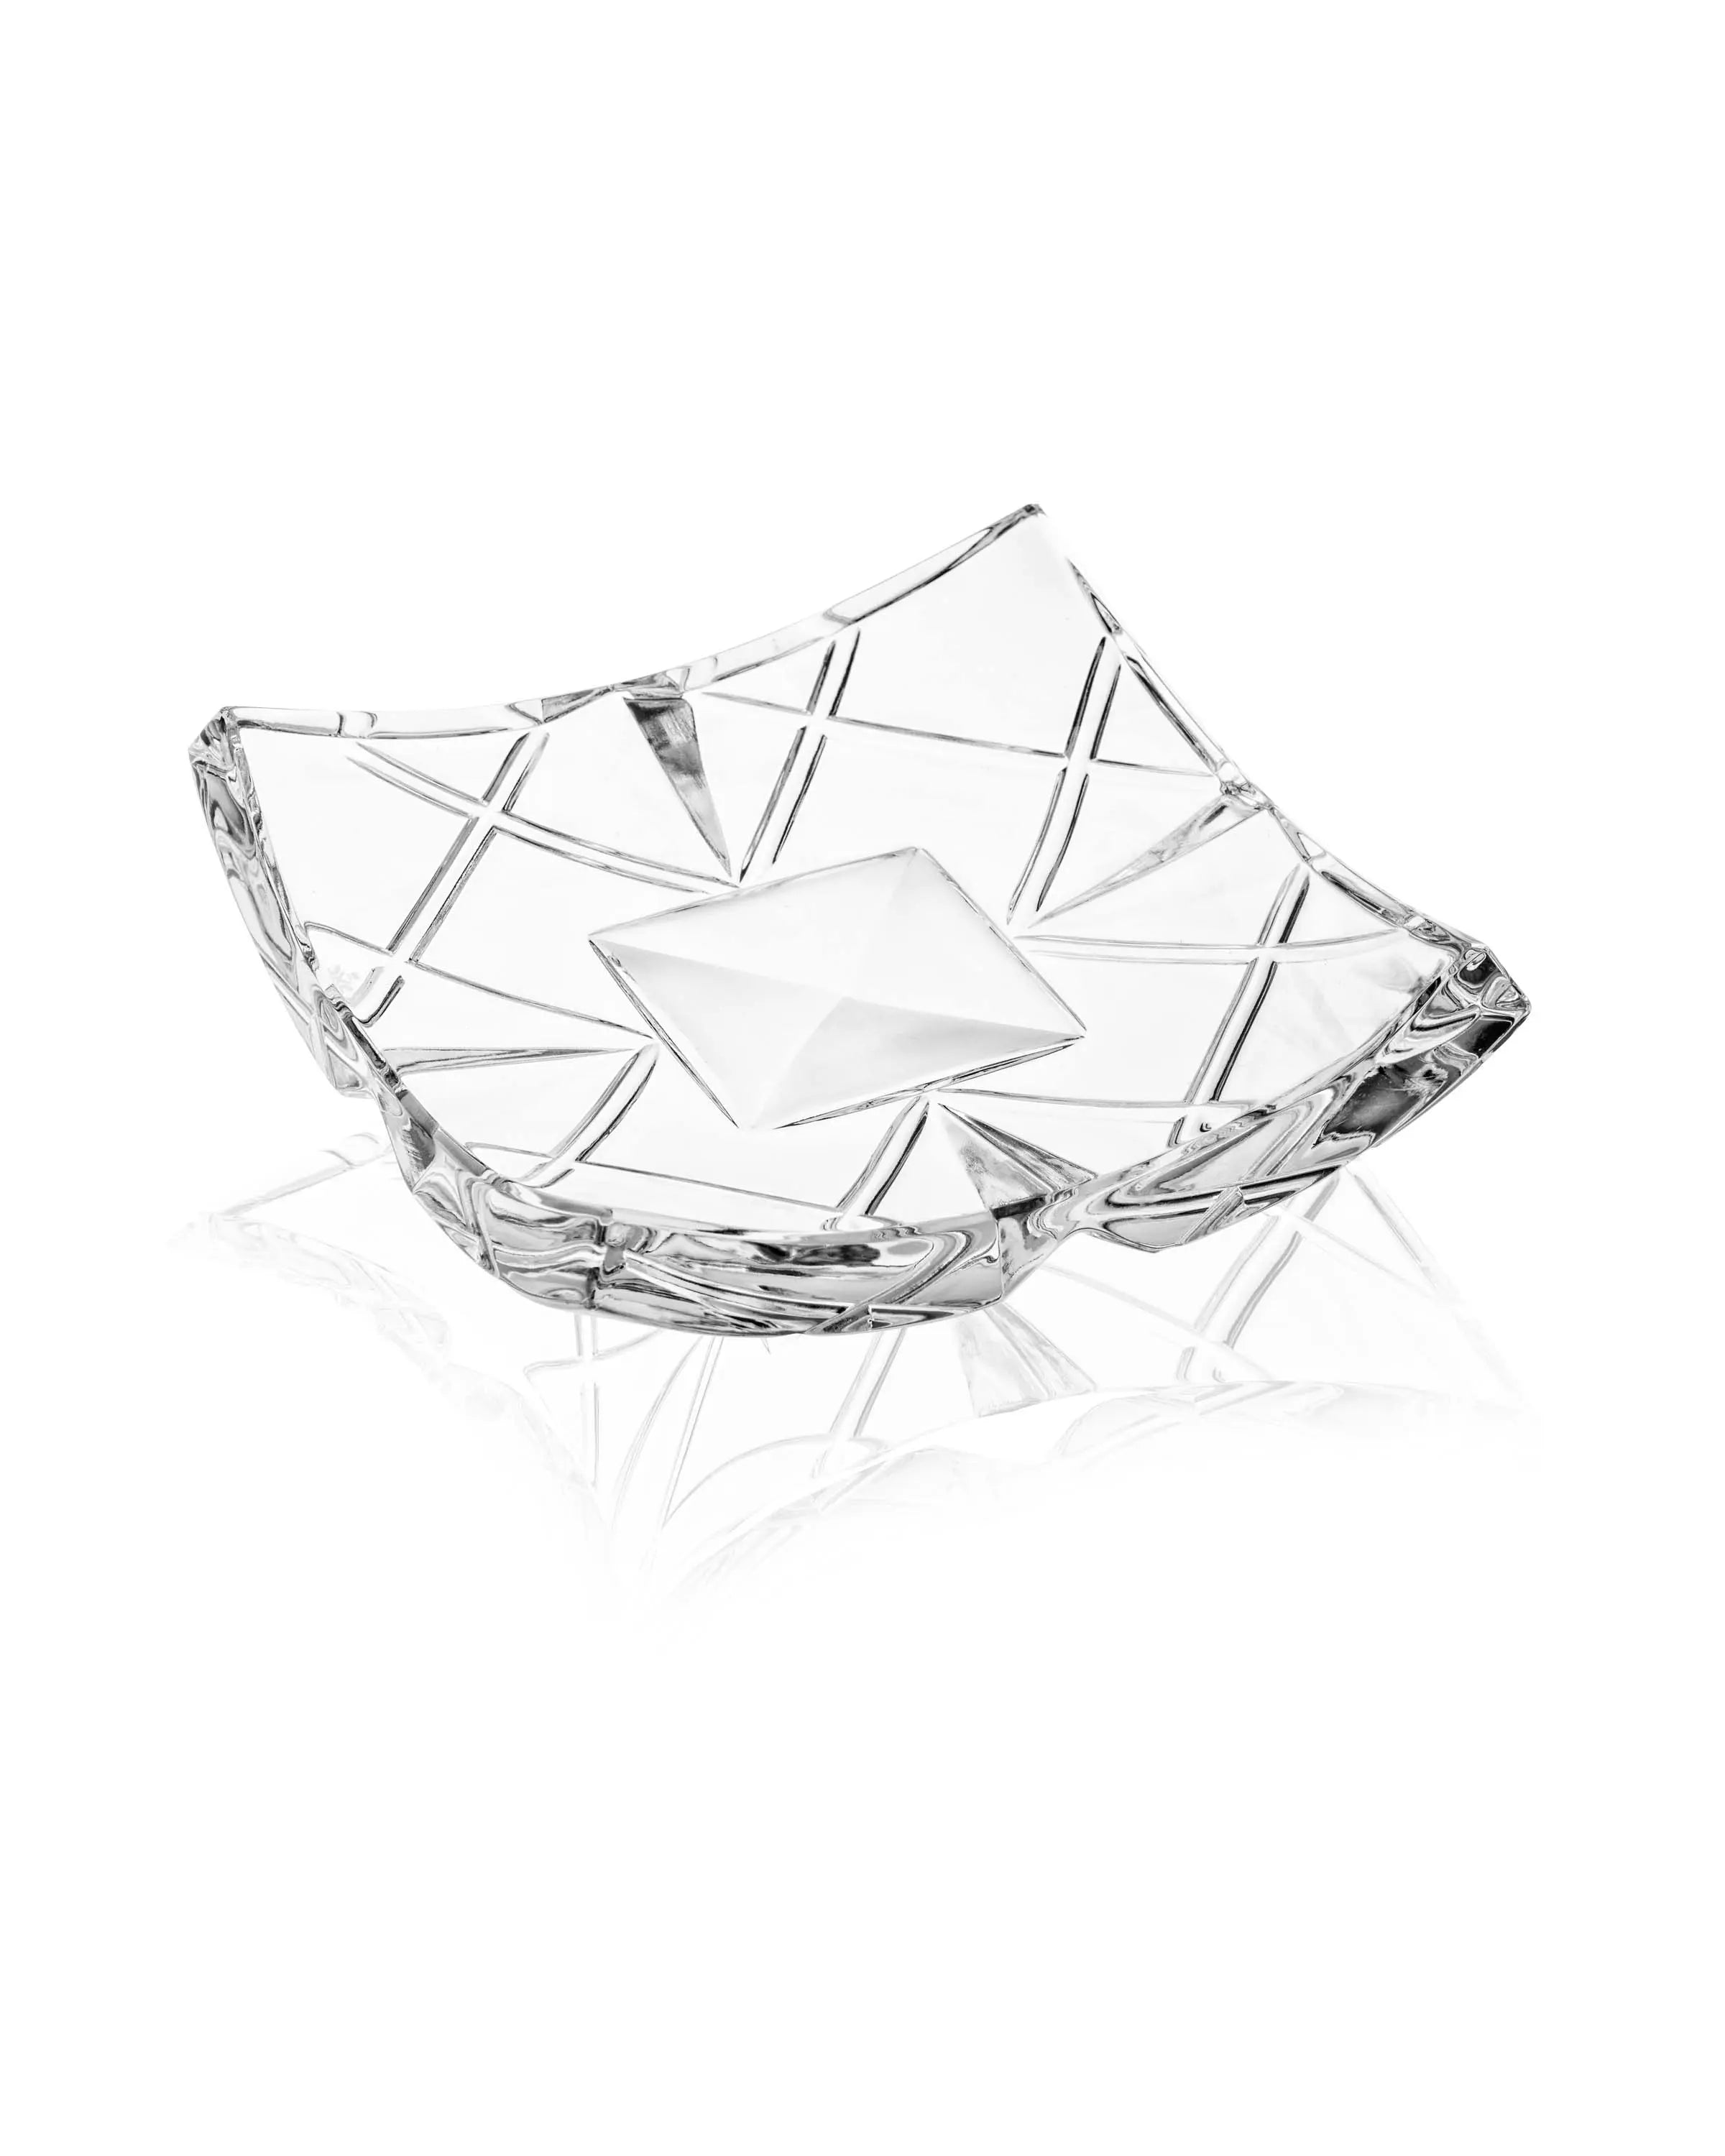 Danica Crystal Soap Dish ANGIE HOMES